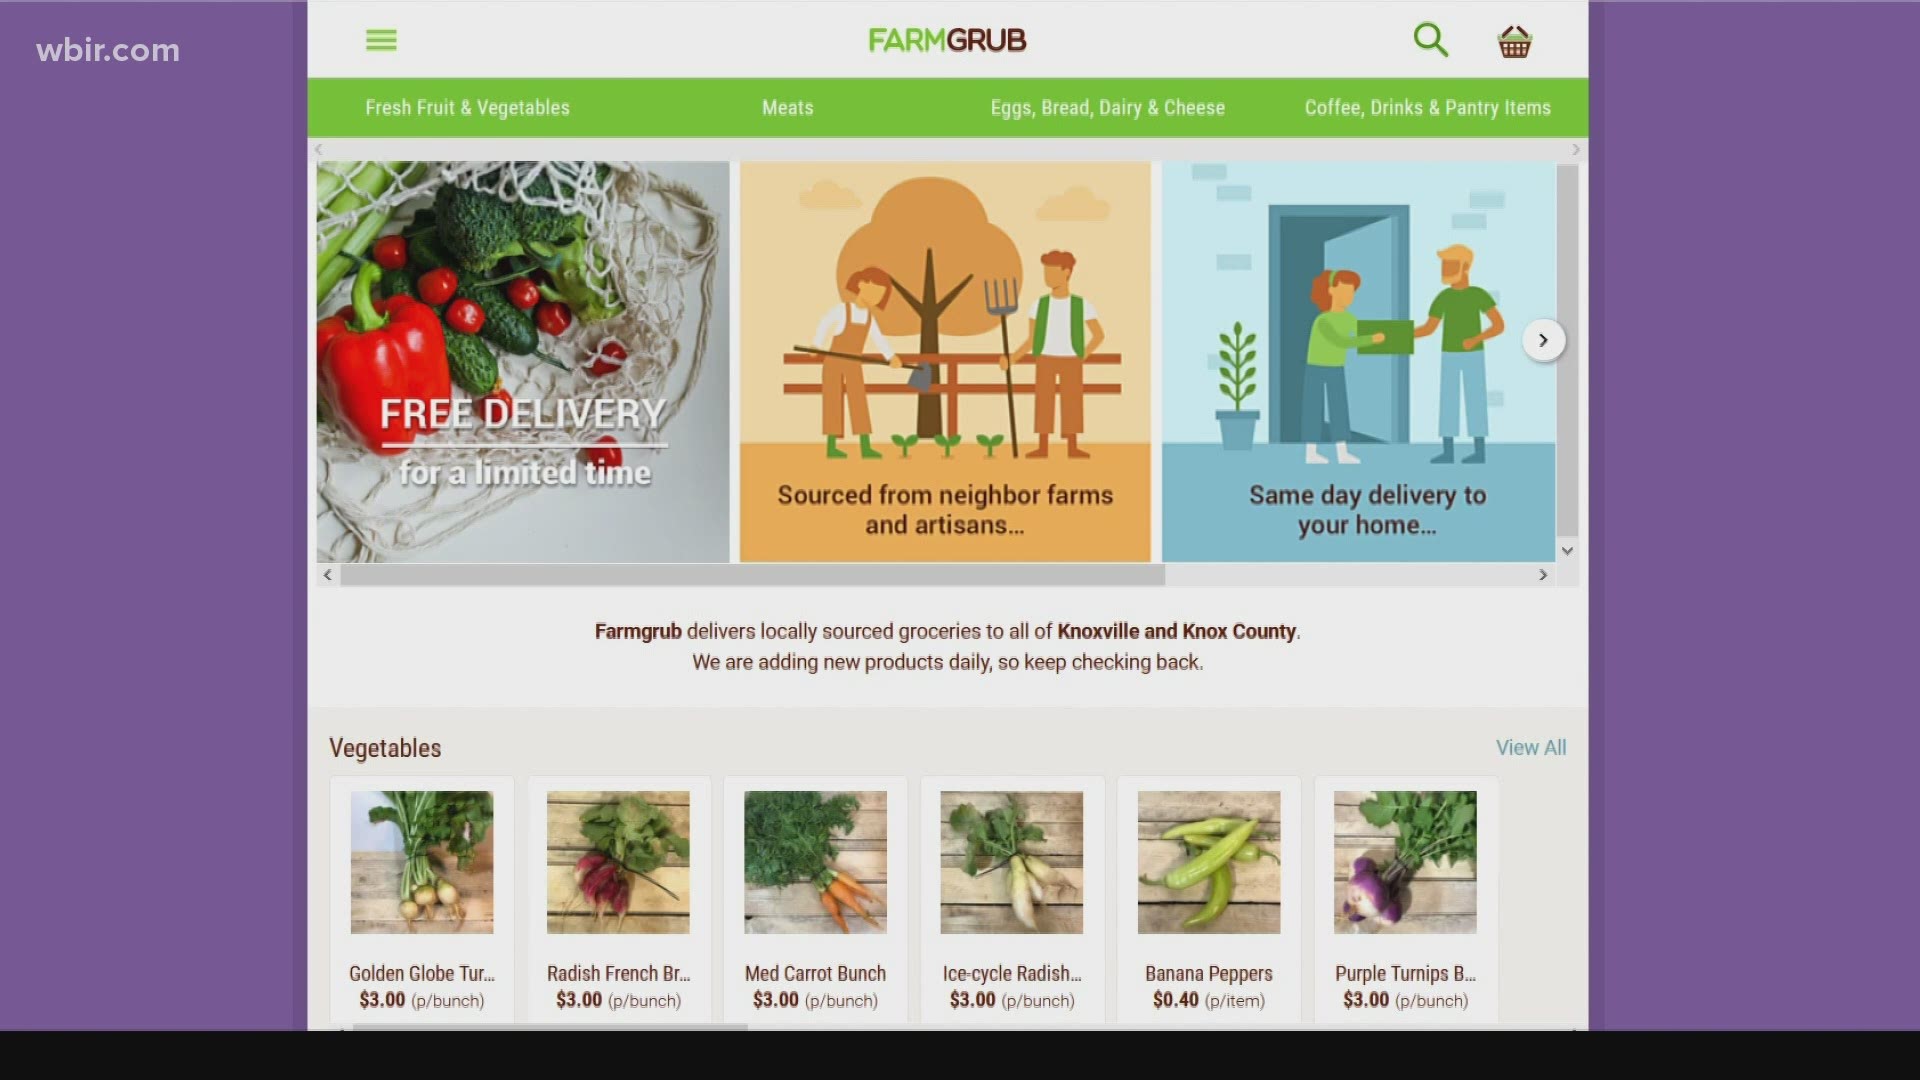 With Farm Grub, people can have fresh produce delivered to their front doors.